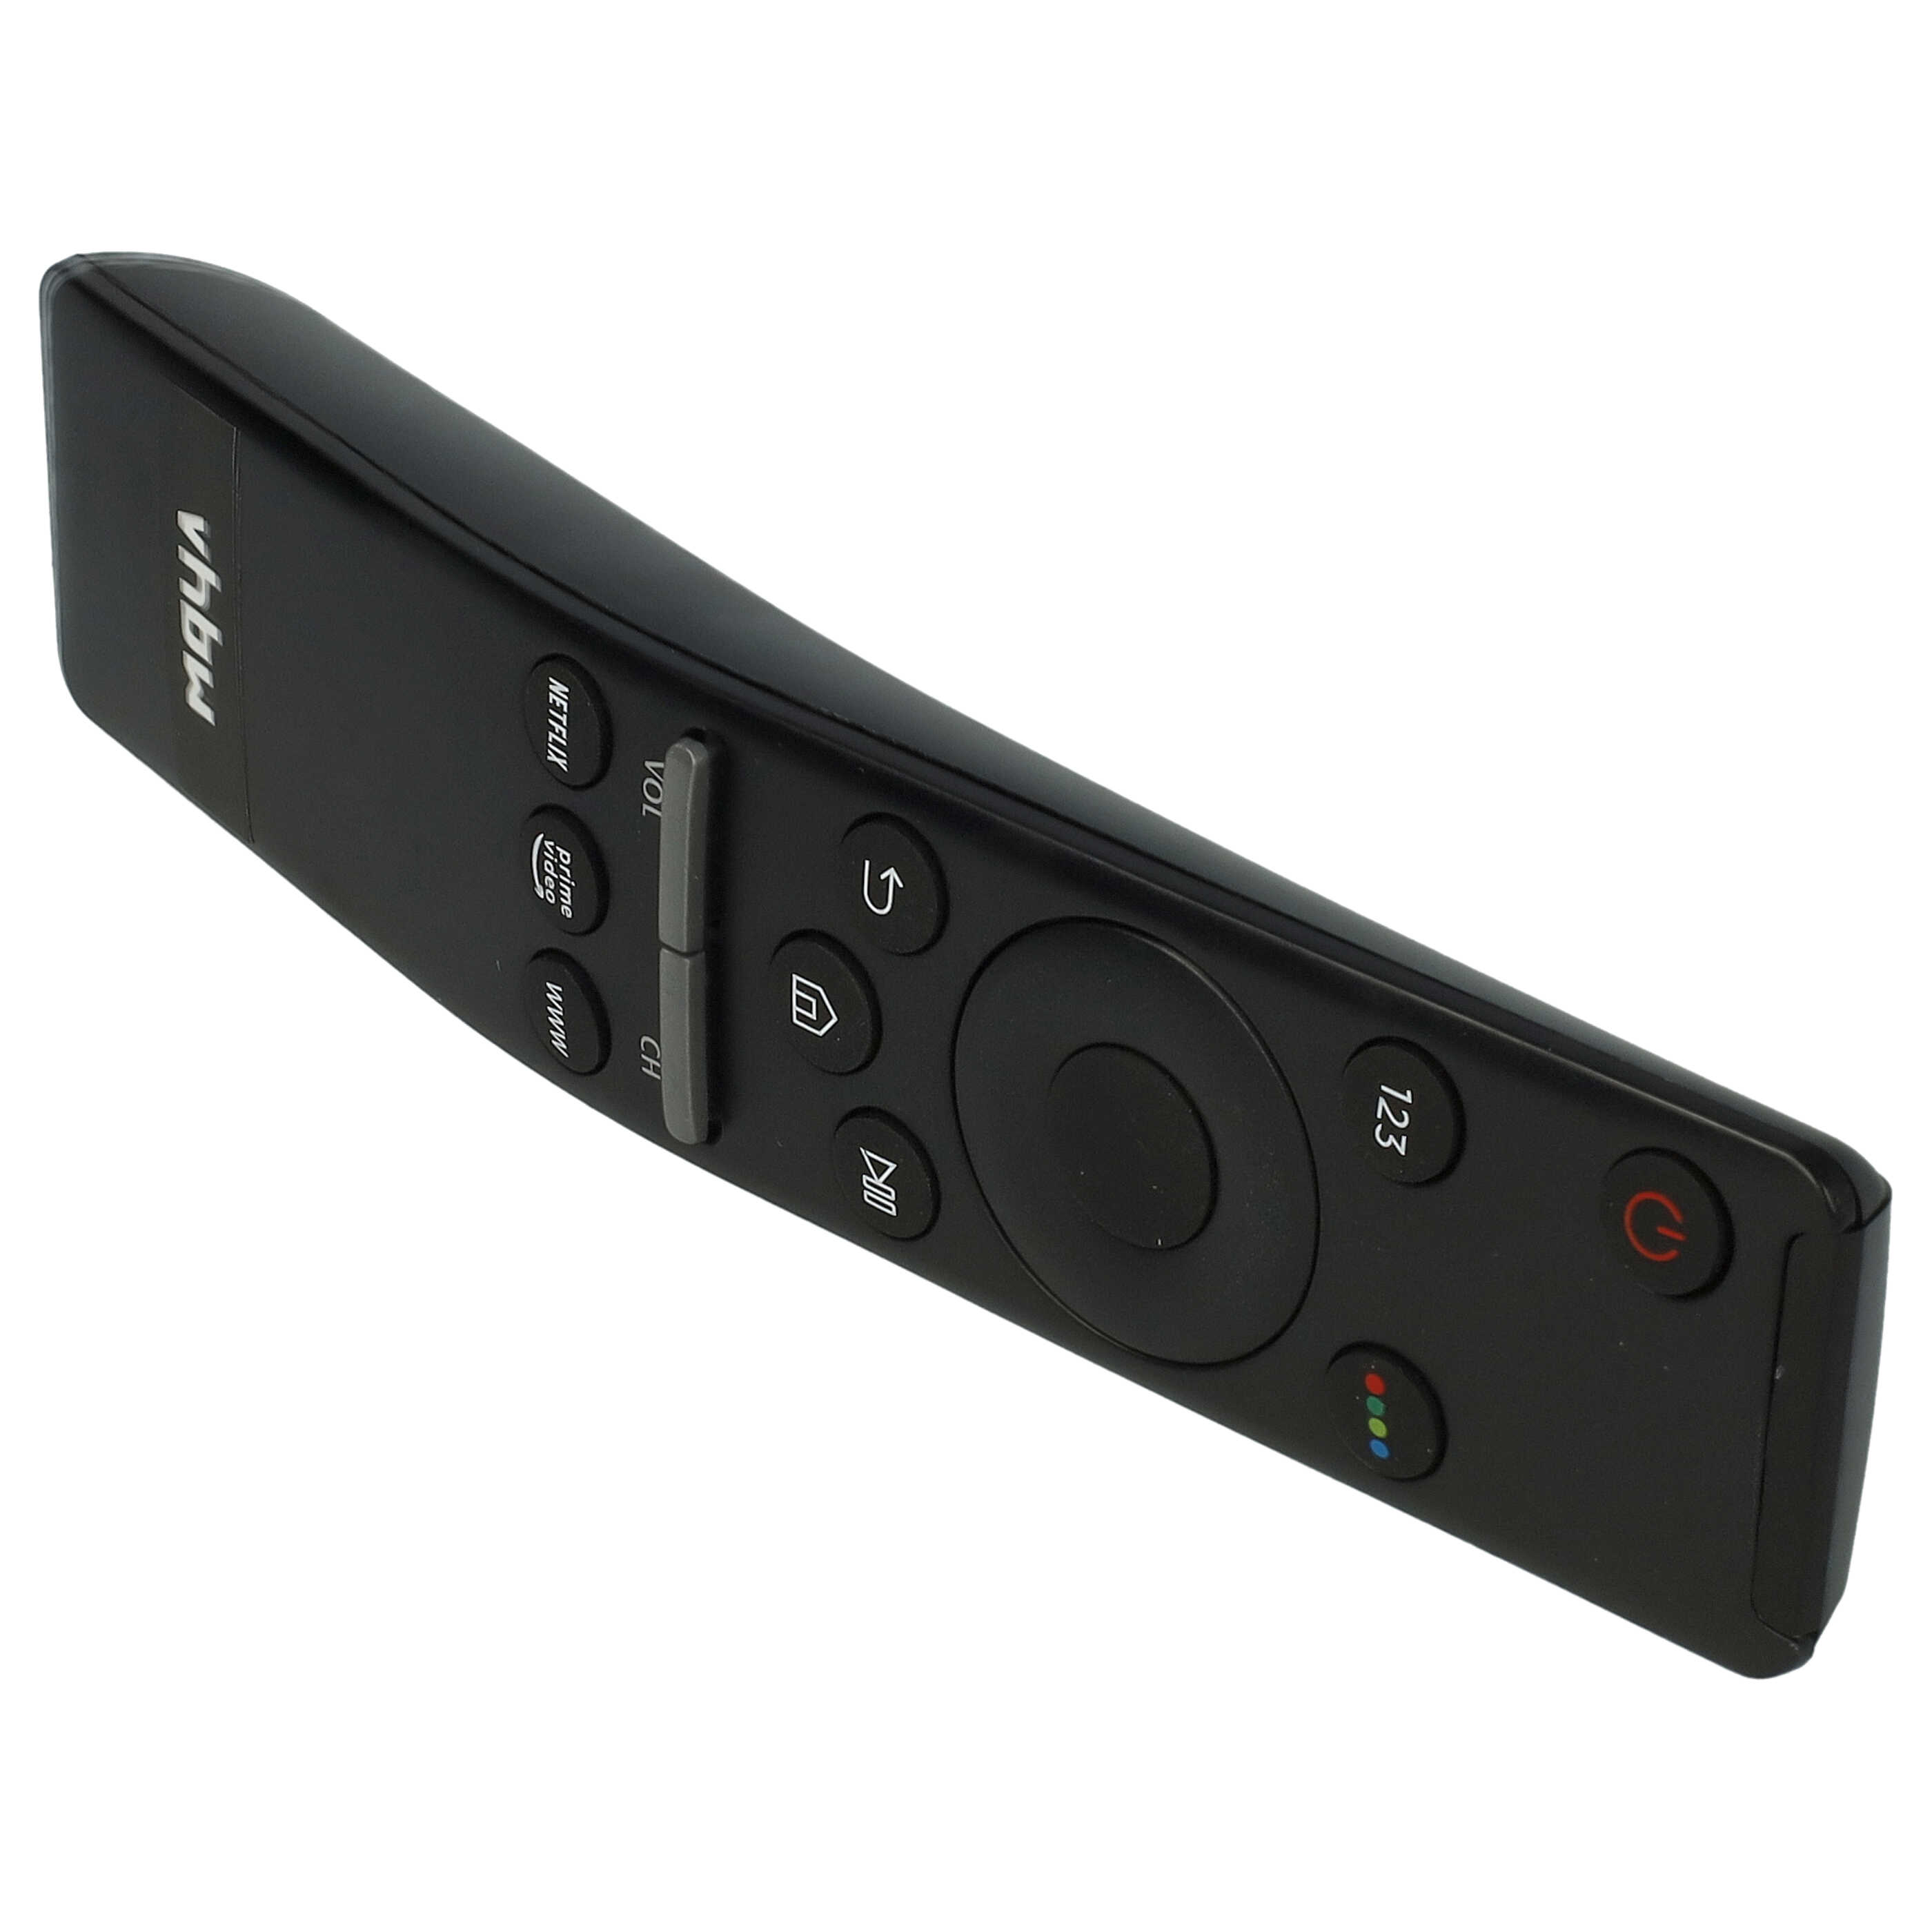 Remote Control replaces Samsung BN59-01310A for Samsung TV